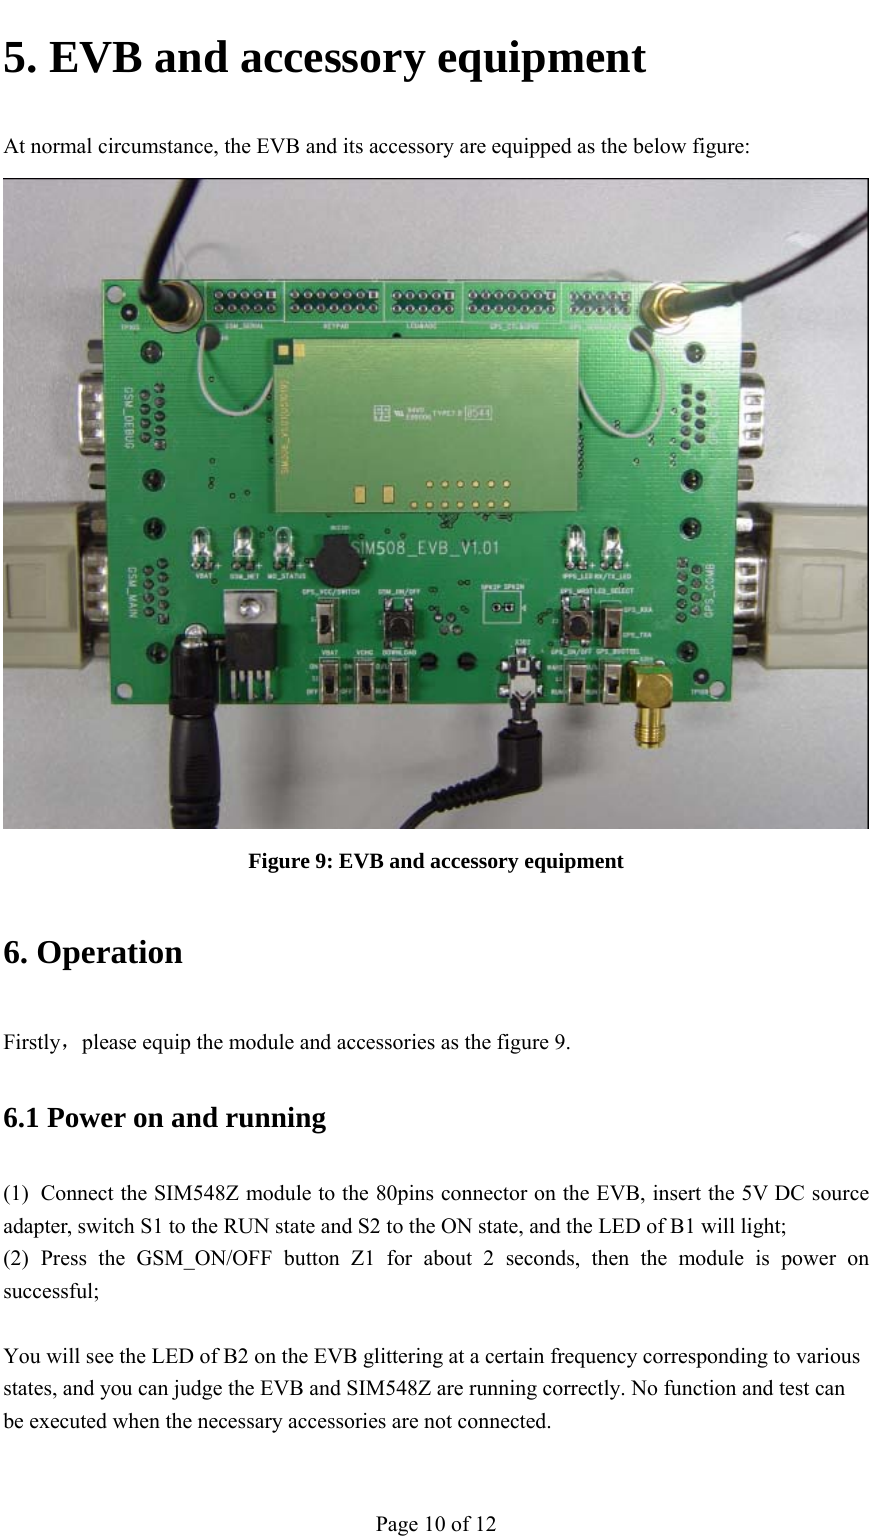                                           5. EVB and accessory equipment At normal circumstance, the EVB and its accessory are equipped as the below figure:  Figure 9: EVB and accessory equipment 6. Operation Firstly，please equip the module and accessories as the figure 9. 6.1 Power on and running (1) Connect the SIM548Z module to the 80pins connector on the EVB, insert the 5V DC source adapter, switch S1 to the RUN state and S2 to the ON state, and the LED of B1 will light; (2) Press the GSM_ON/OFF button Z1 for about 2 seconds, then the module is power on successful;  You will see the LED of B2 on the EVB glittering at a certain frequency corresponding to various states, and you can judge the EVB and SIM548Z are running correctly. No function and test can be executed when the necessary accessories are not connected. Page 10 of 12 